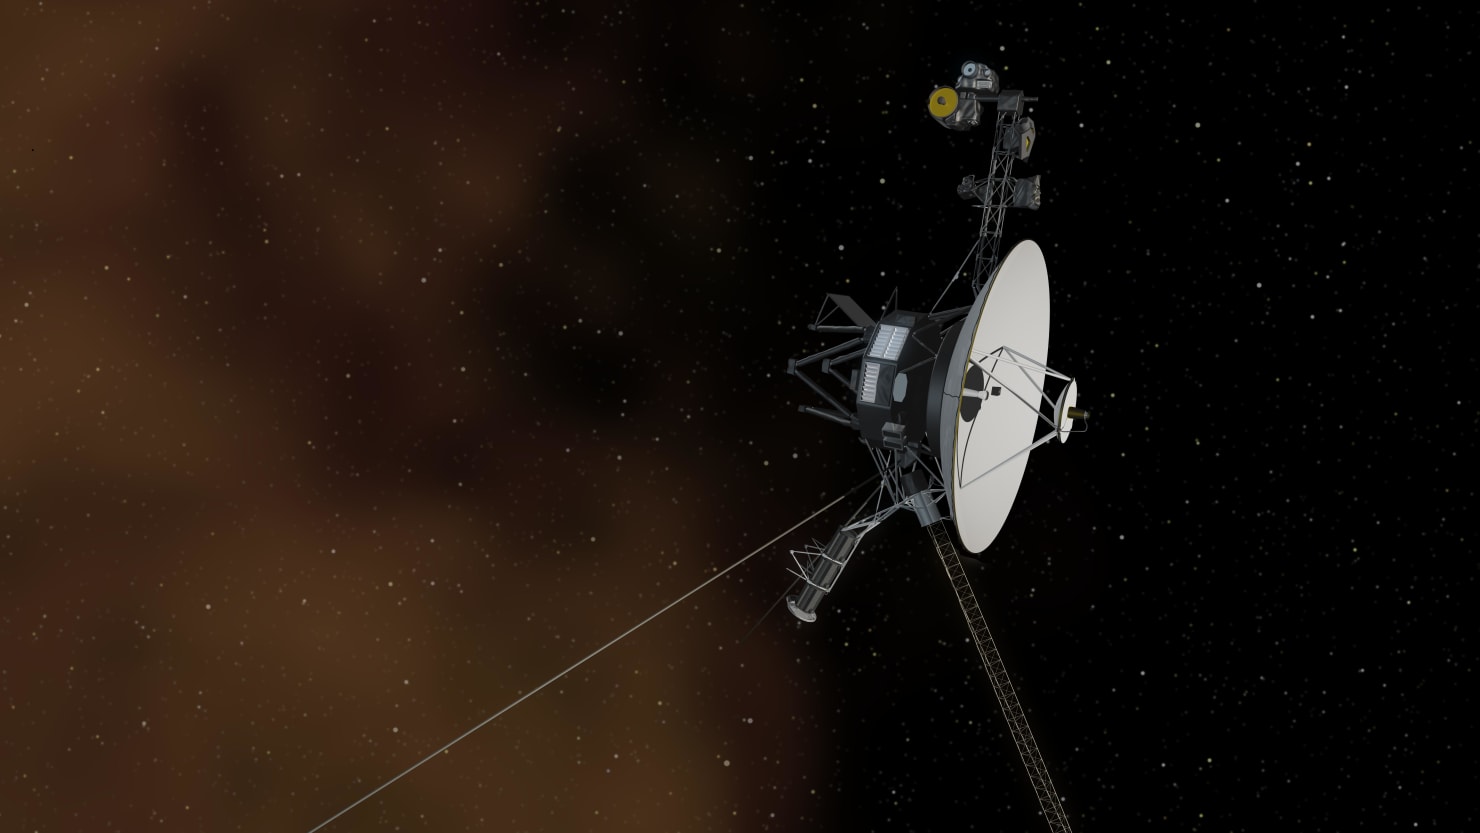 NASA Hears Heartbeat From Voyager 2 Probe After 11-Day Radio Silence